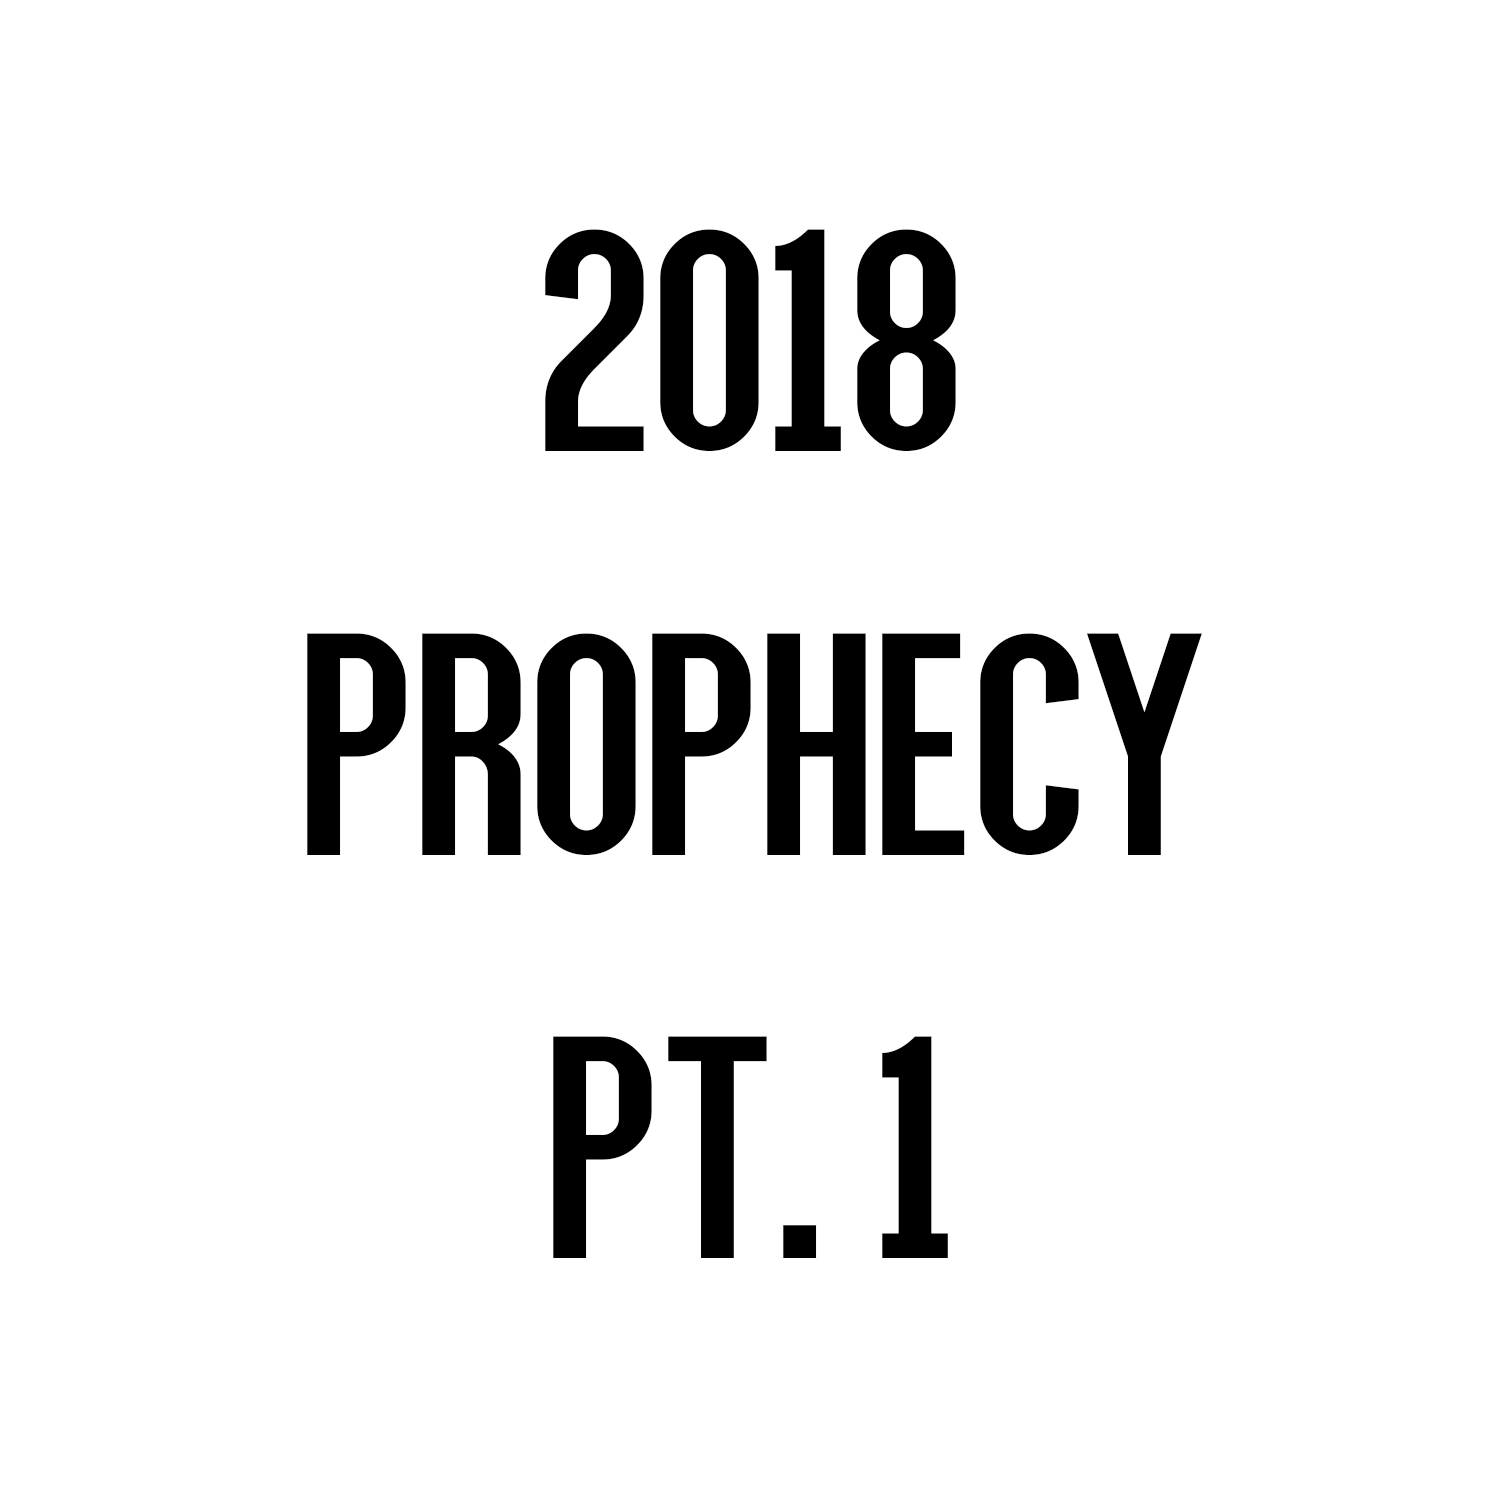 Intro to Johnny’s Prophetic Word for the New Year | Part 1 of 4